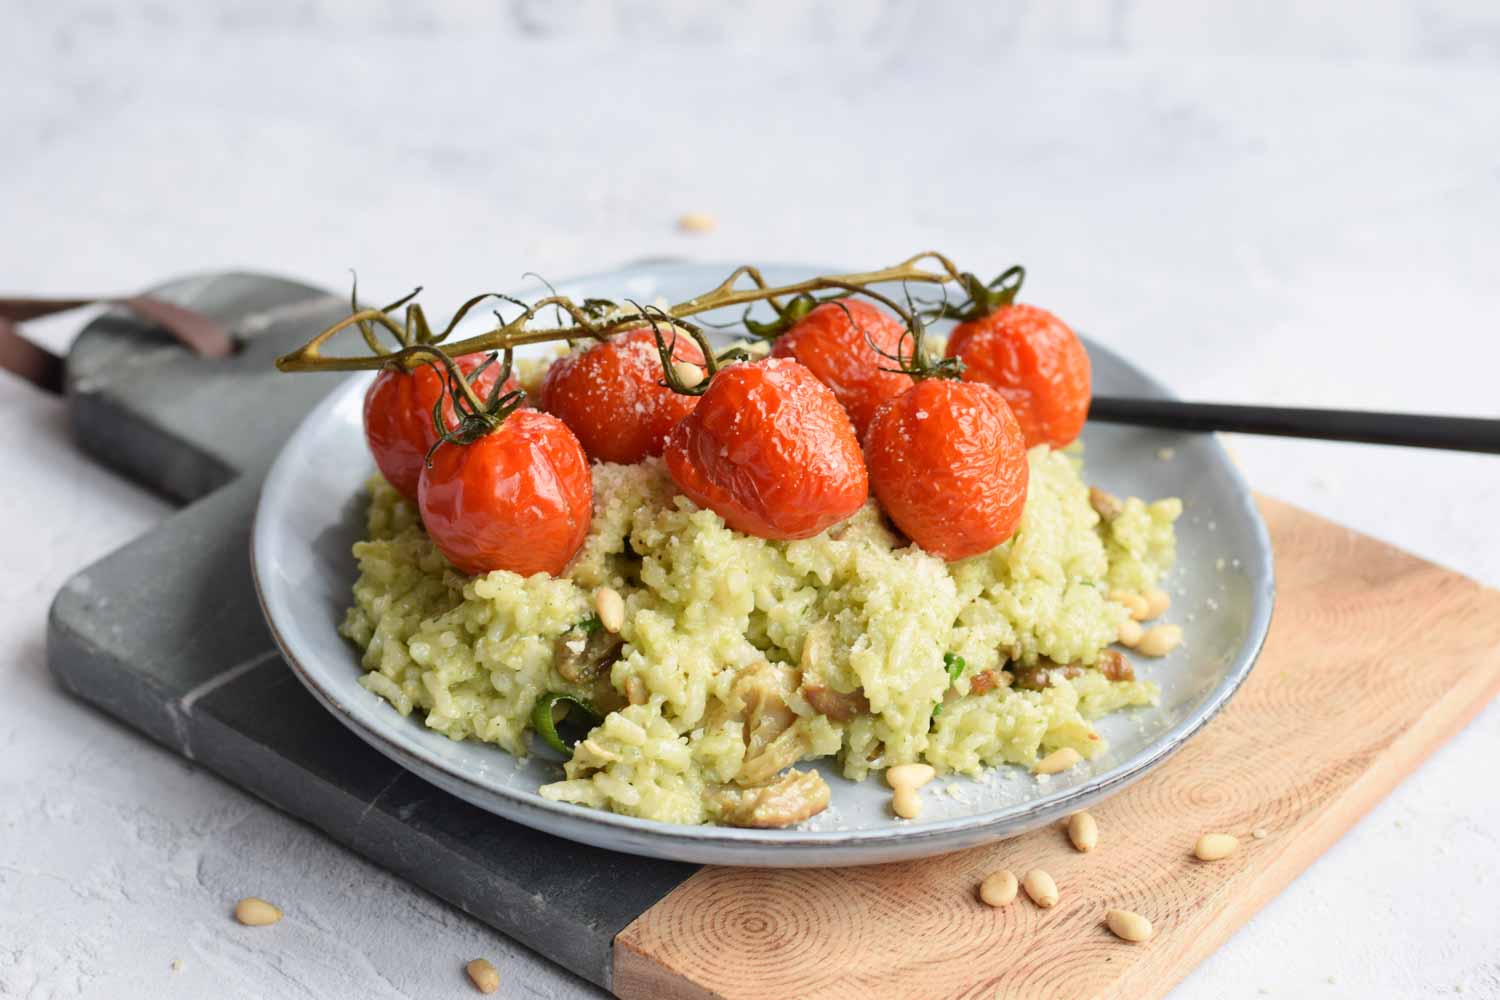 A plate with risotto and grilled tomatoes